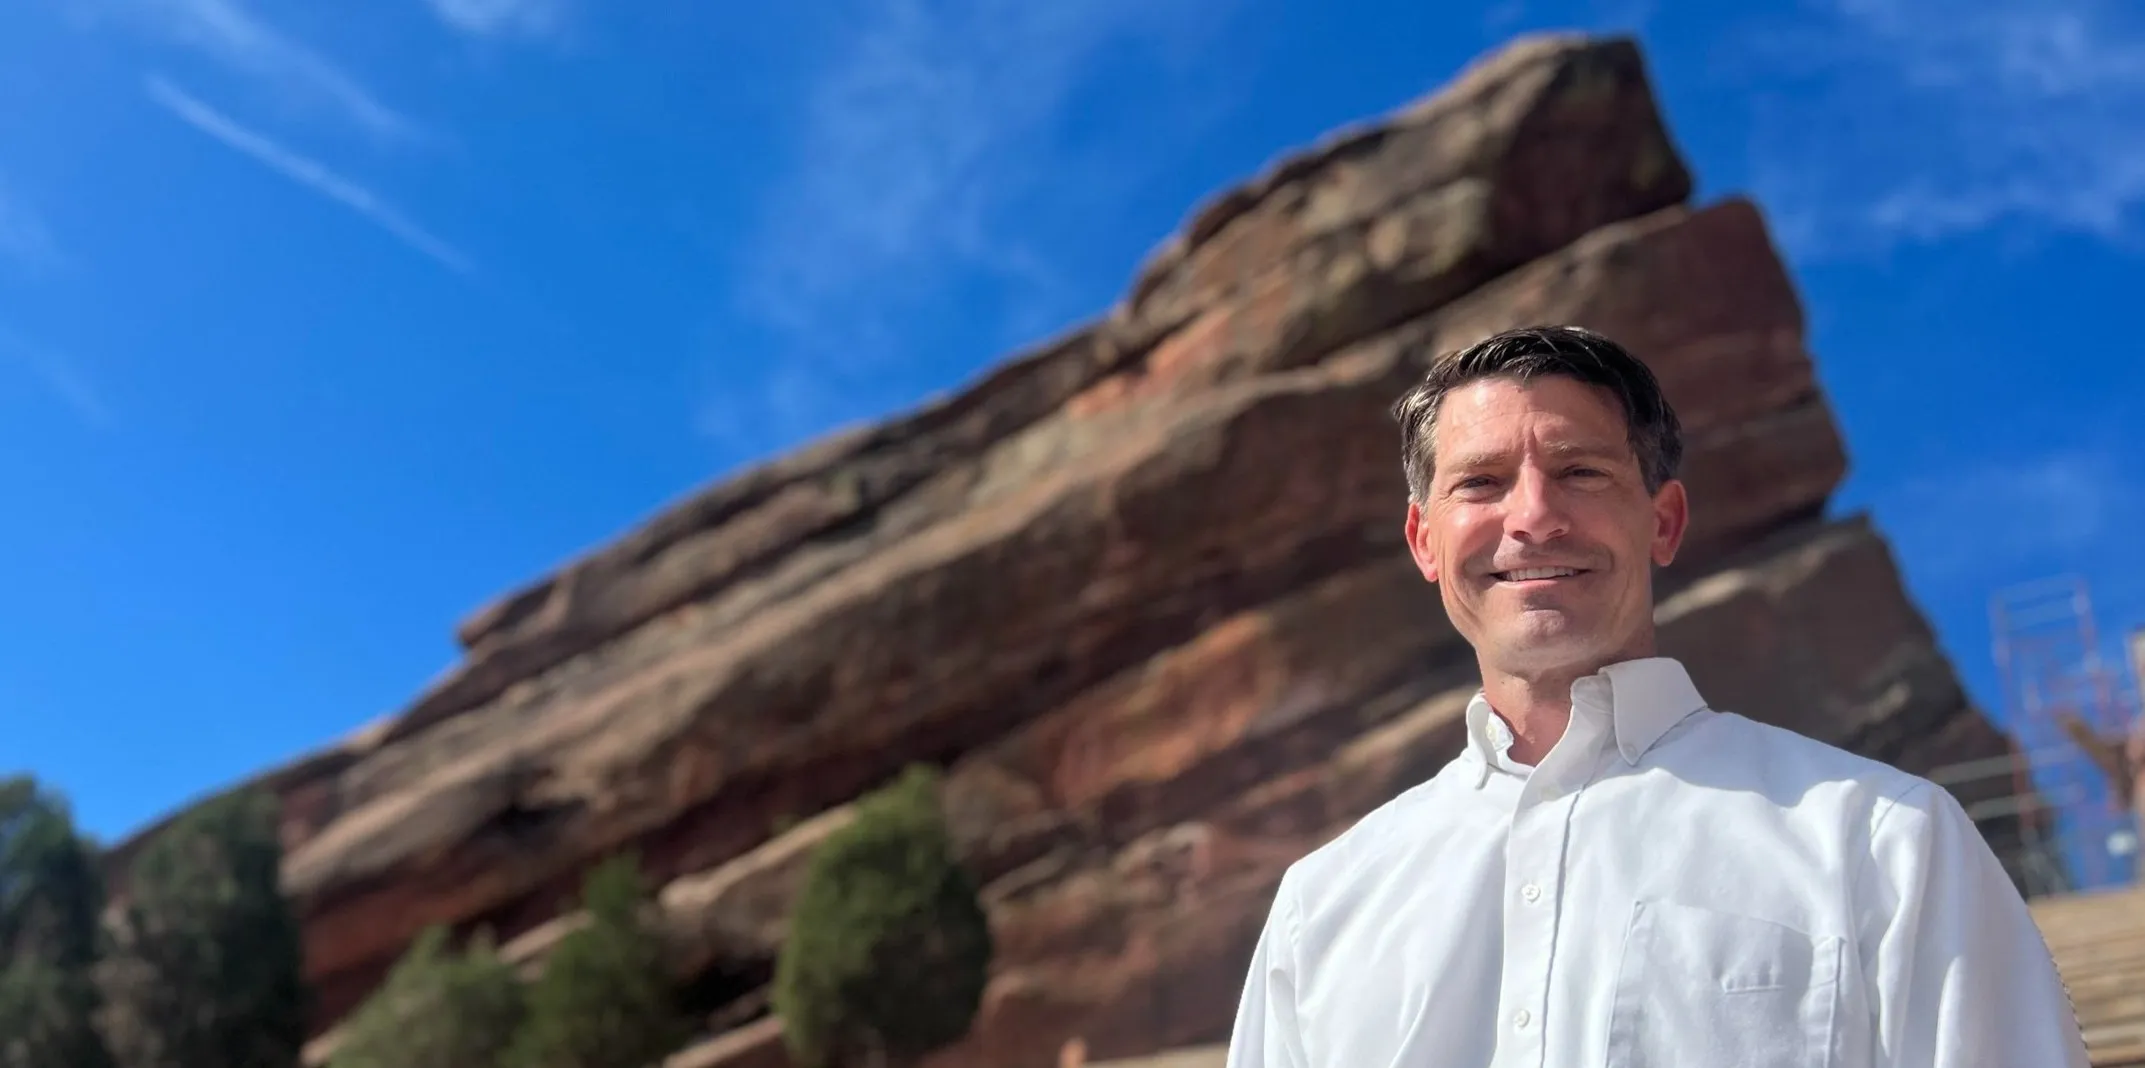 Ron Tupa, independent candidate for Congress, at Colorado's Red Rocks Amphitheatre